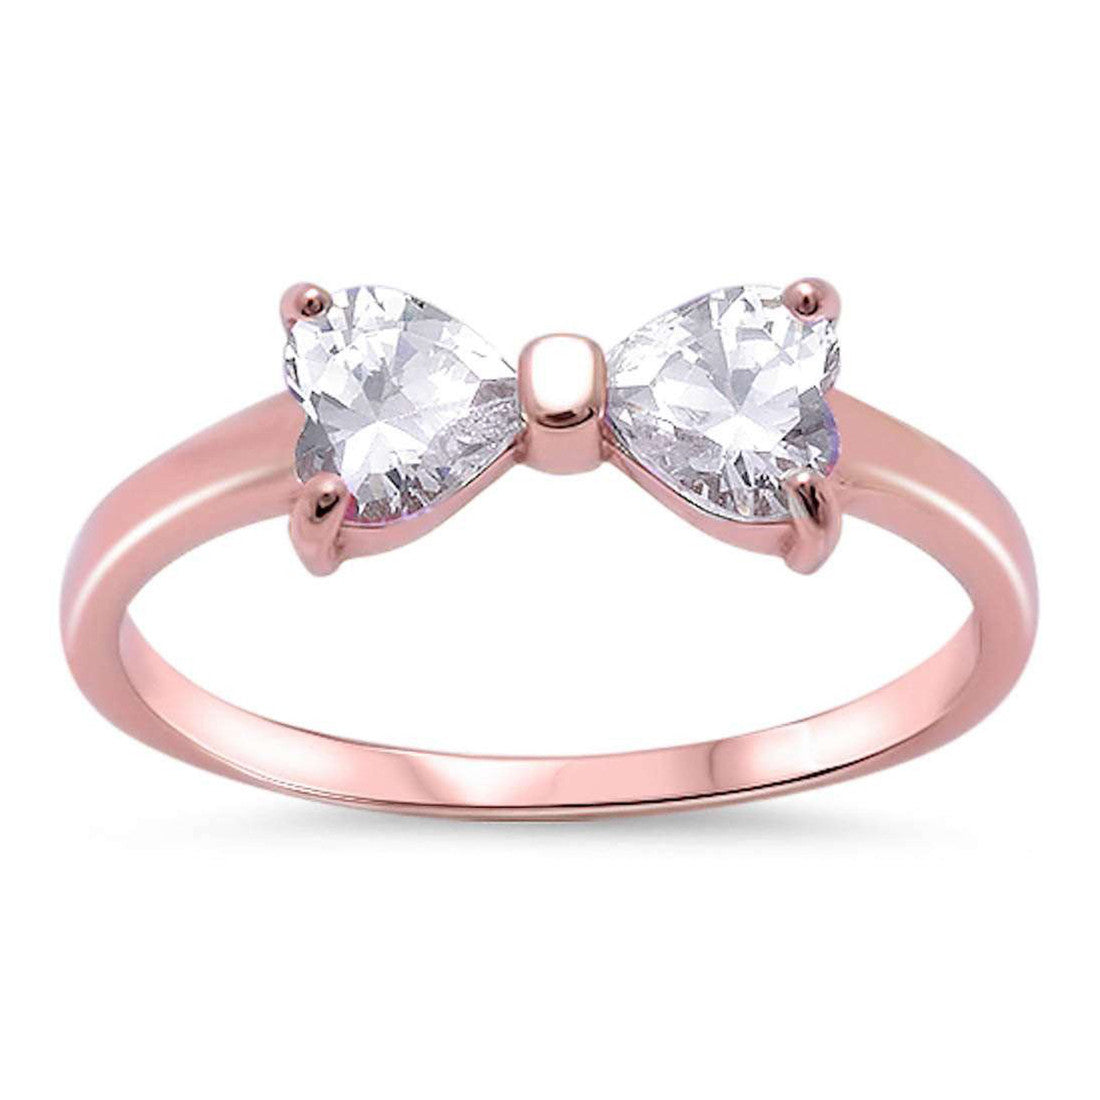 Petite Dainty Heart Ribbon Bow Tie Ring Heart CZ Rose Gold Rhodium Plated 925 Sterling Silver - Blue Apple Jewelry